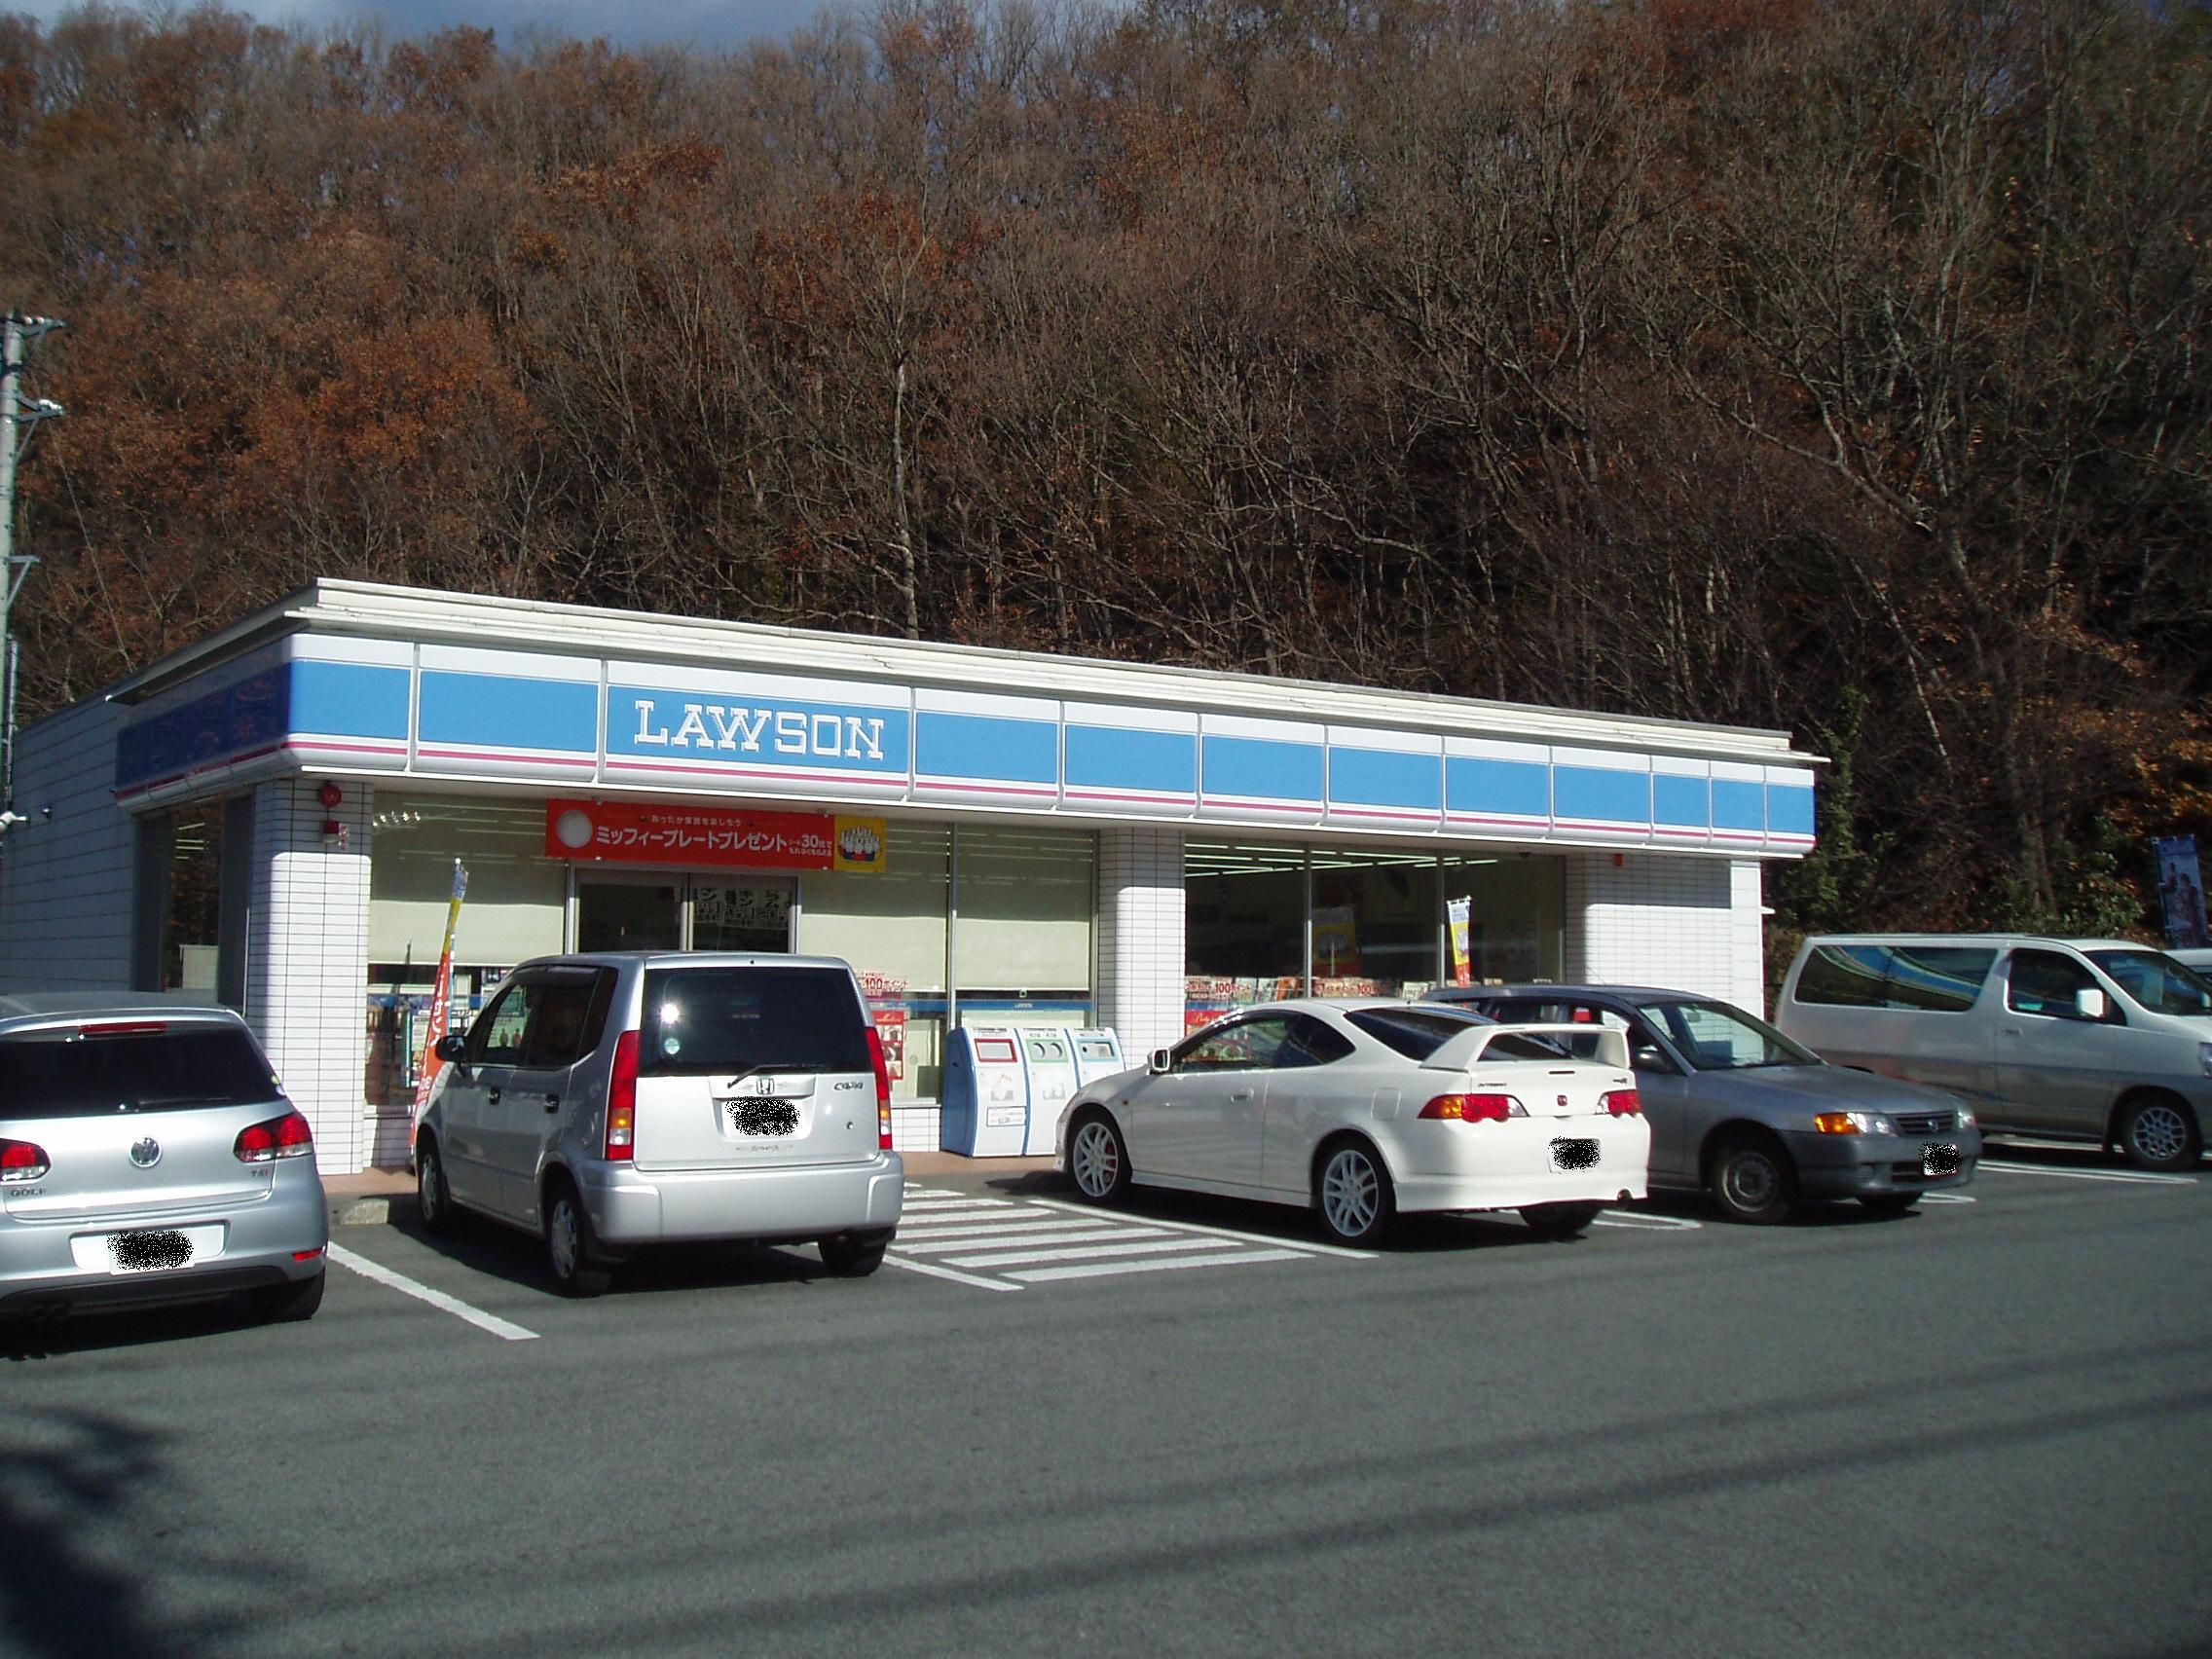 Convenience store. 224m until Lawson Ito Ogimise (convenience store)